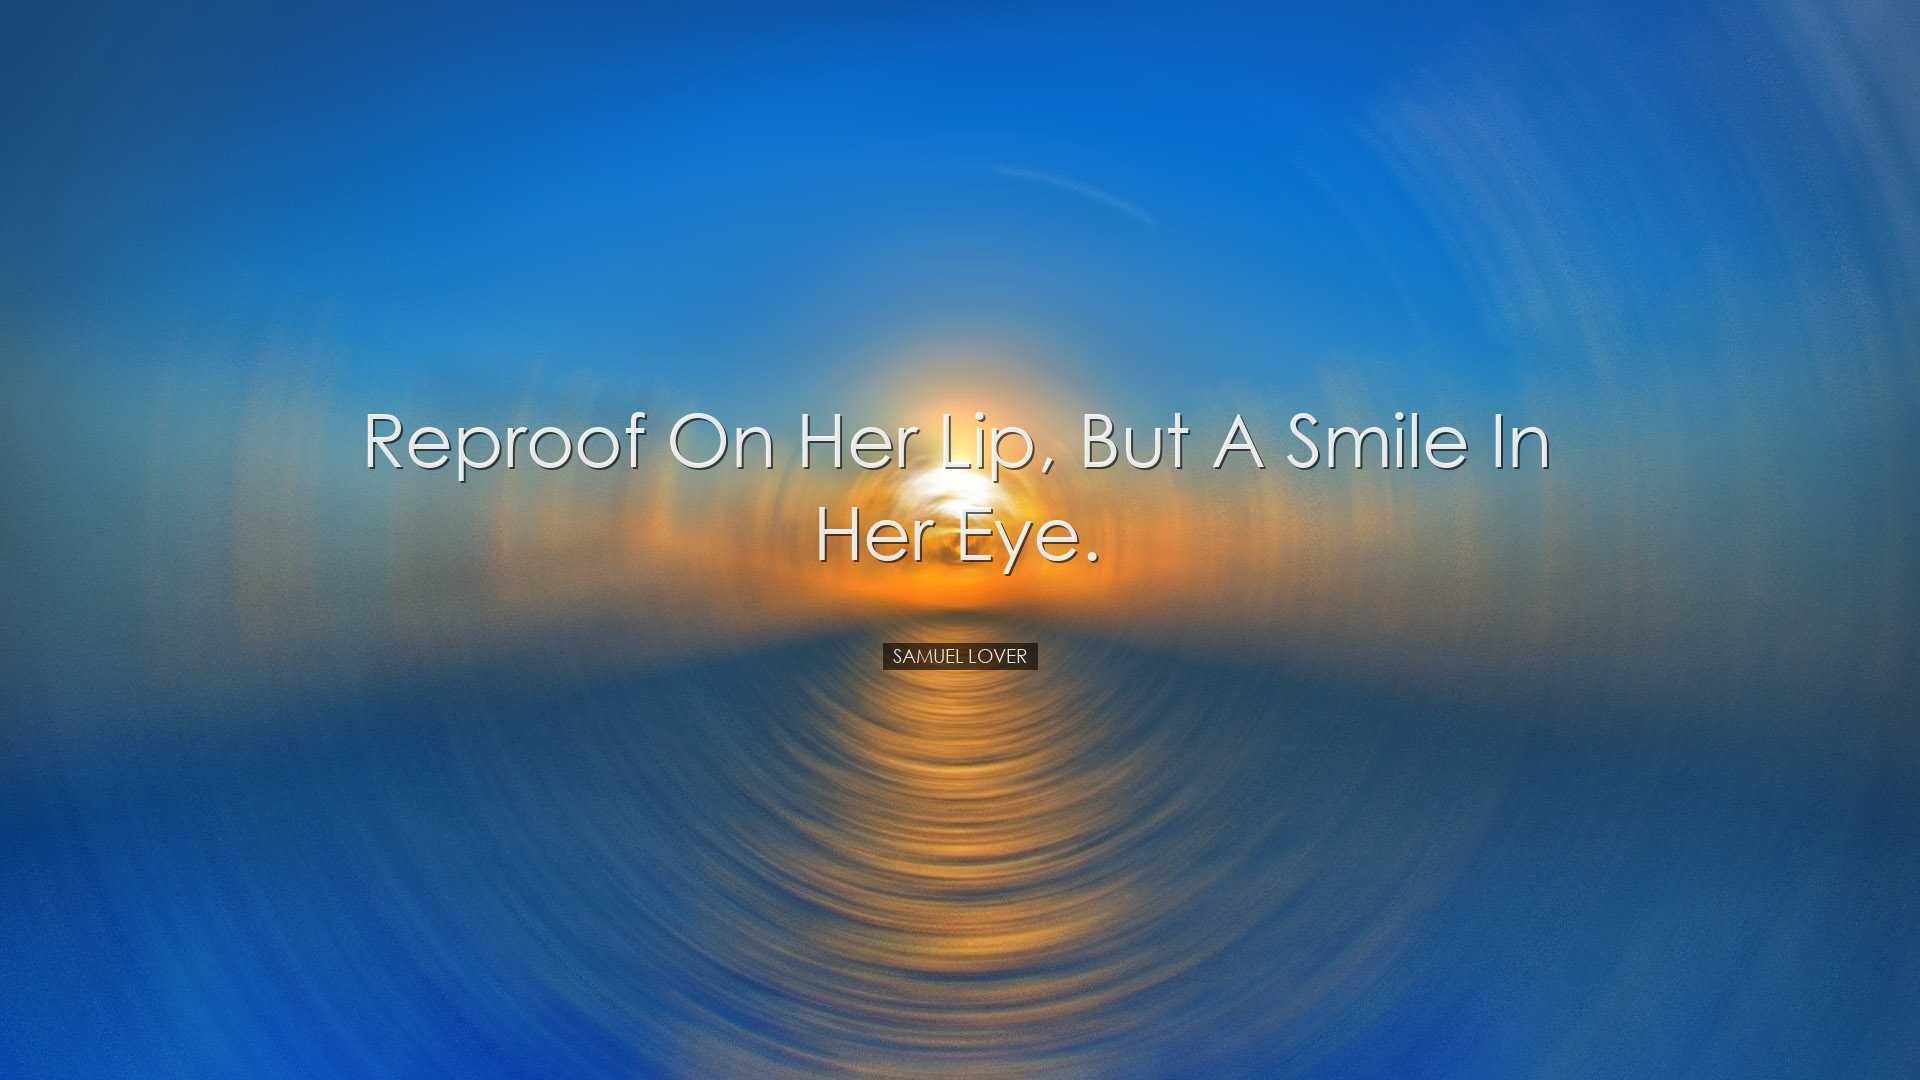 Reproof on her lip, but a smile in her eye. - Samuel Lover